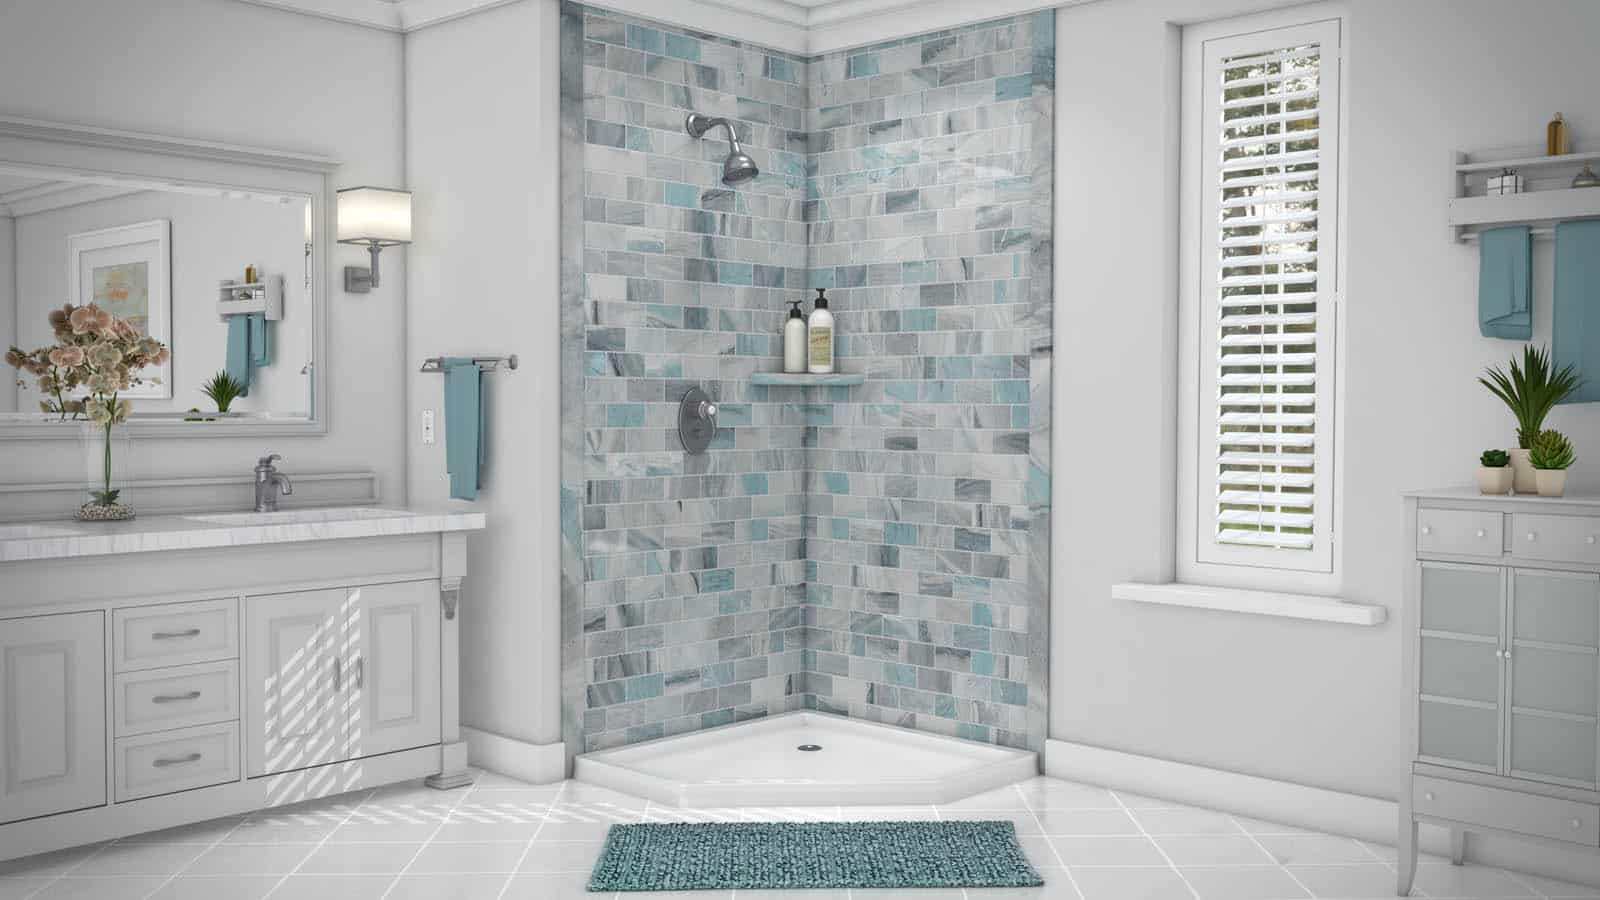 American Home Remodeling Bathroom remodel with Sentrel Simtile wall panels in color "Triton."